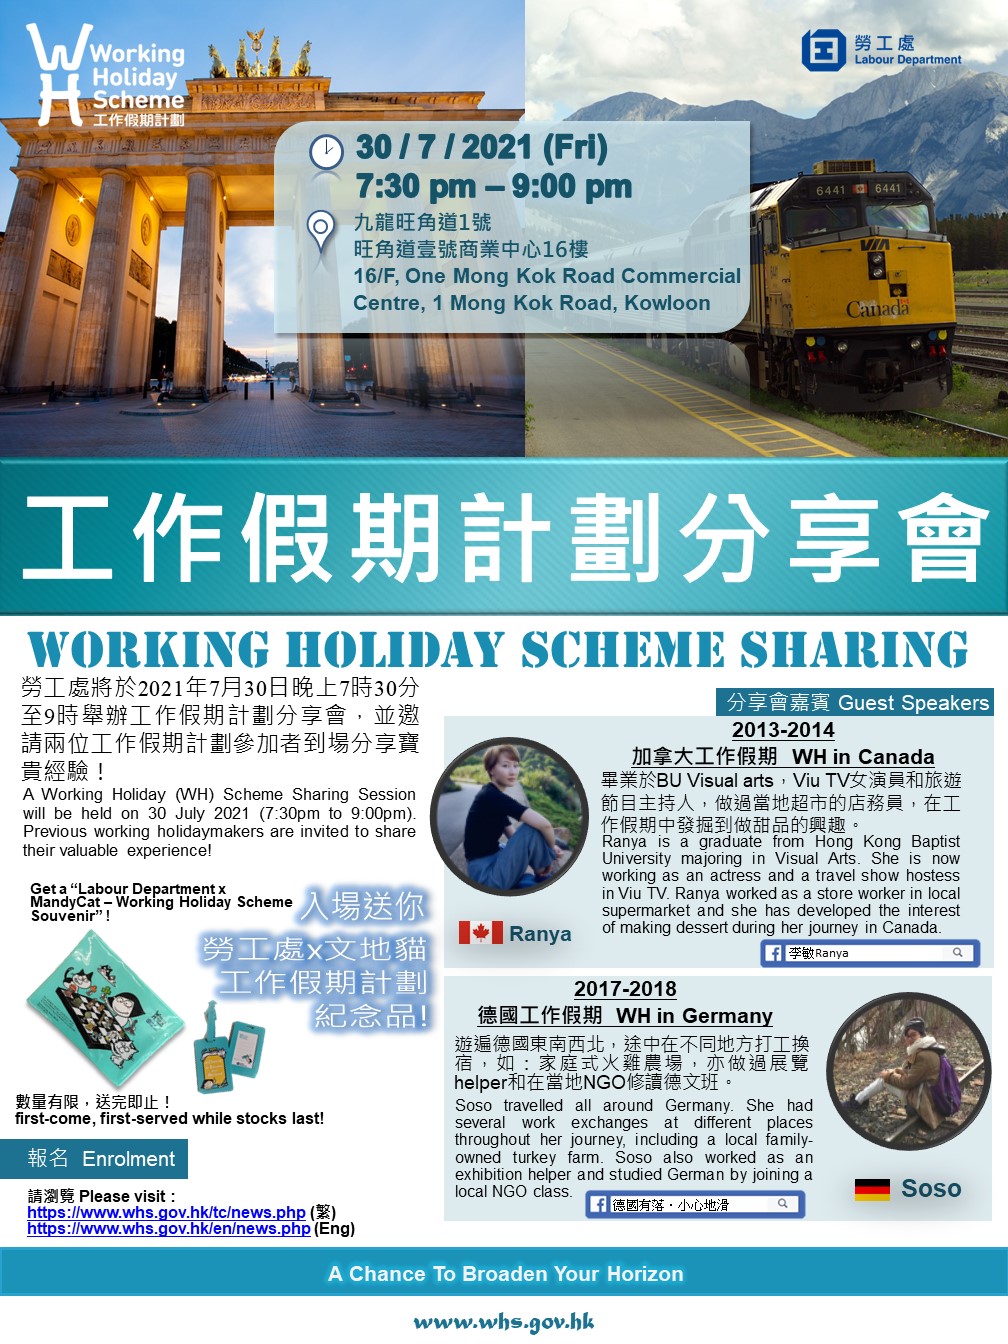 Working Holiday Scheme Sharing Session Opens for Enrolment